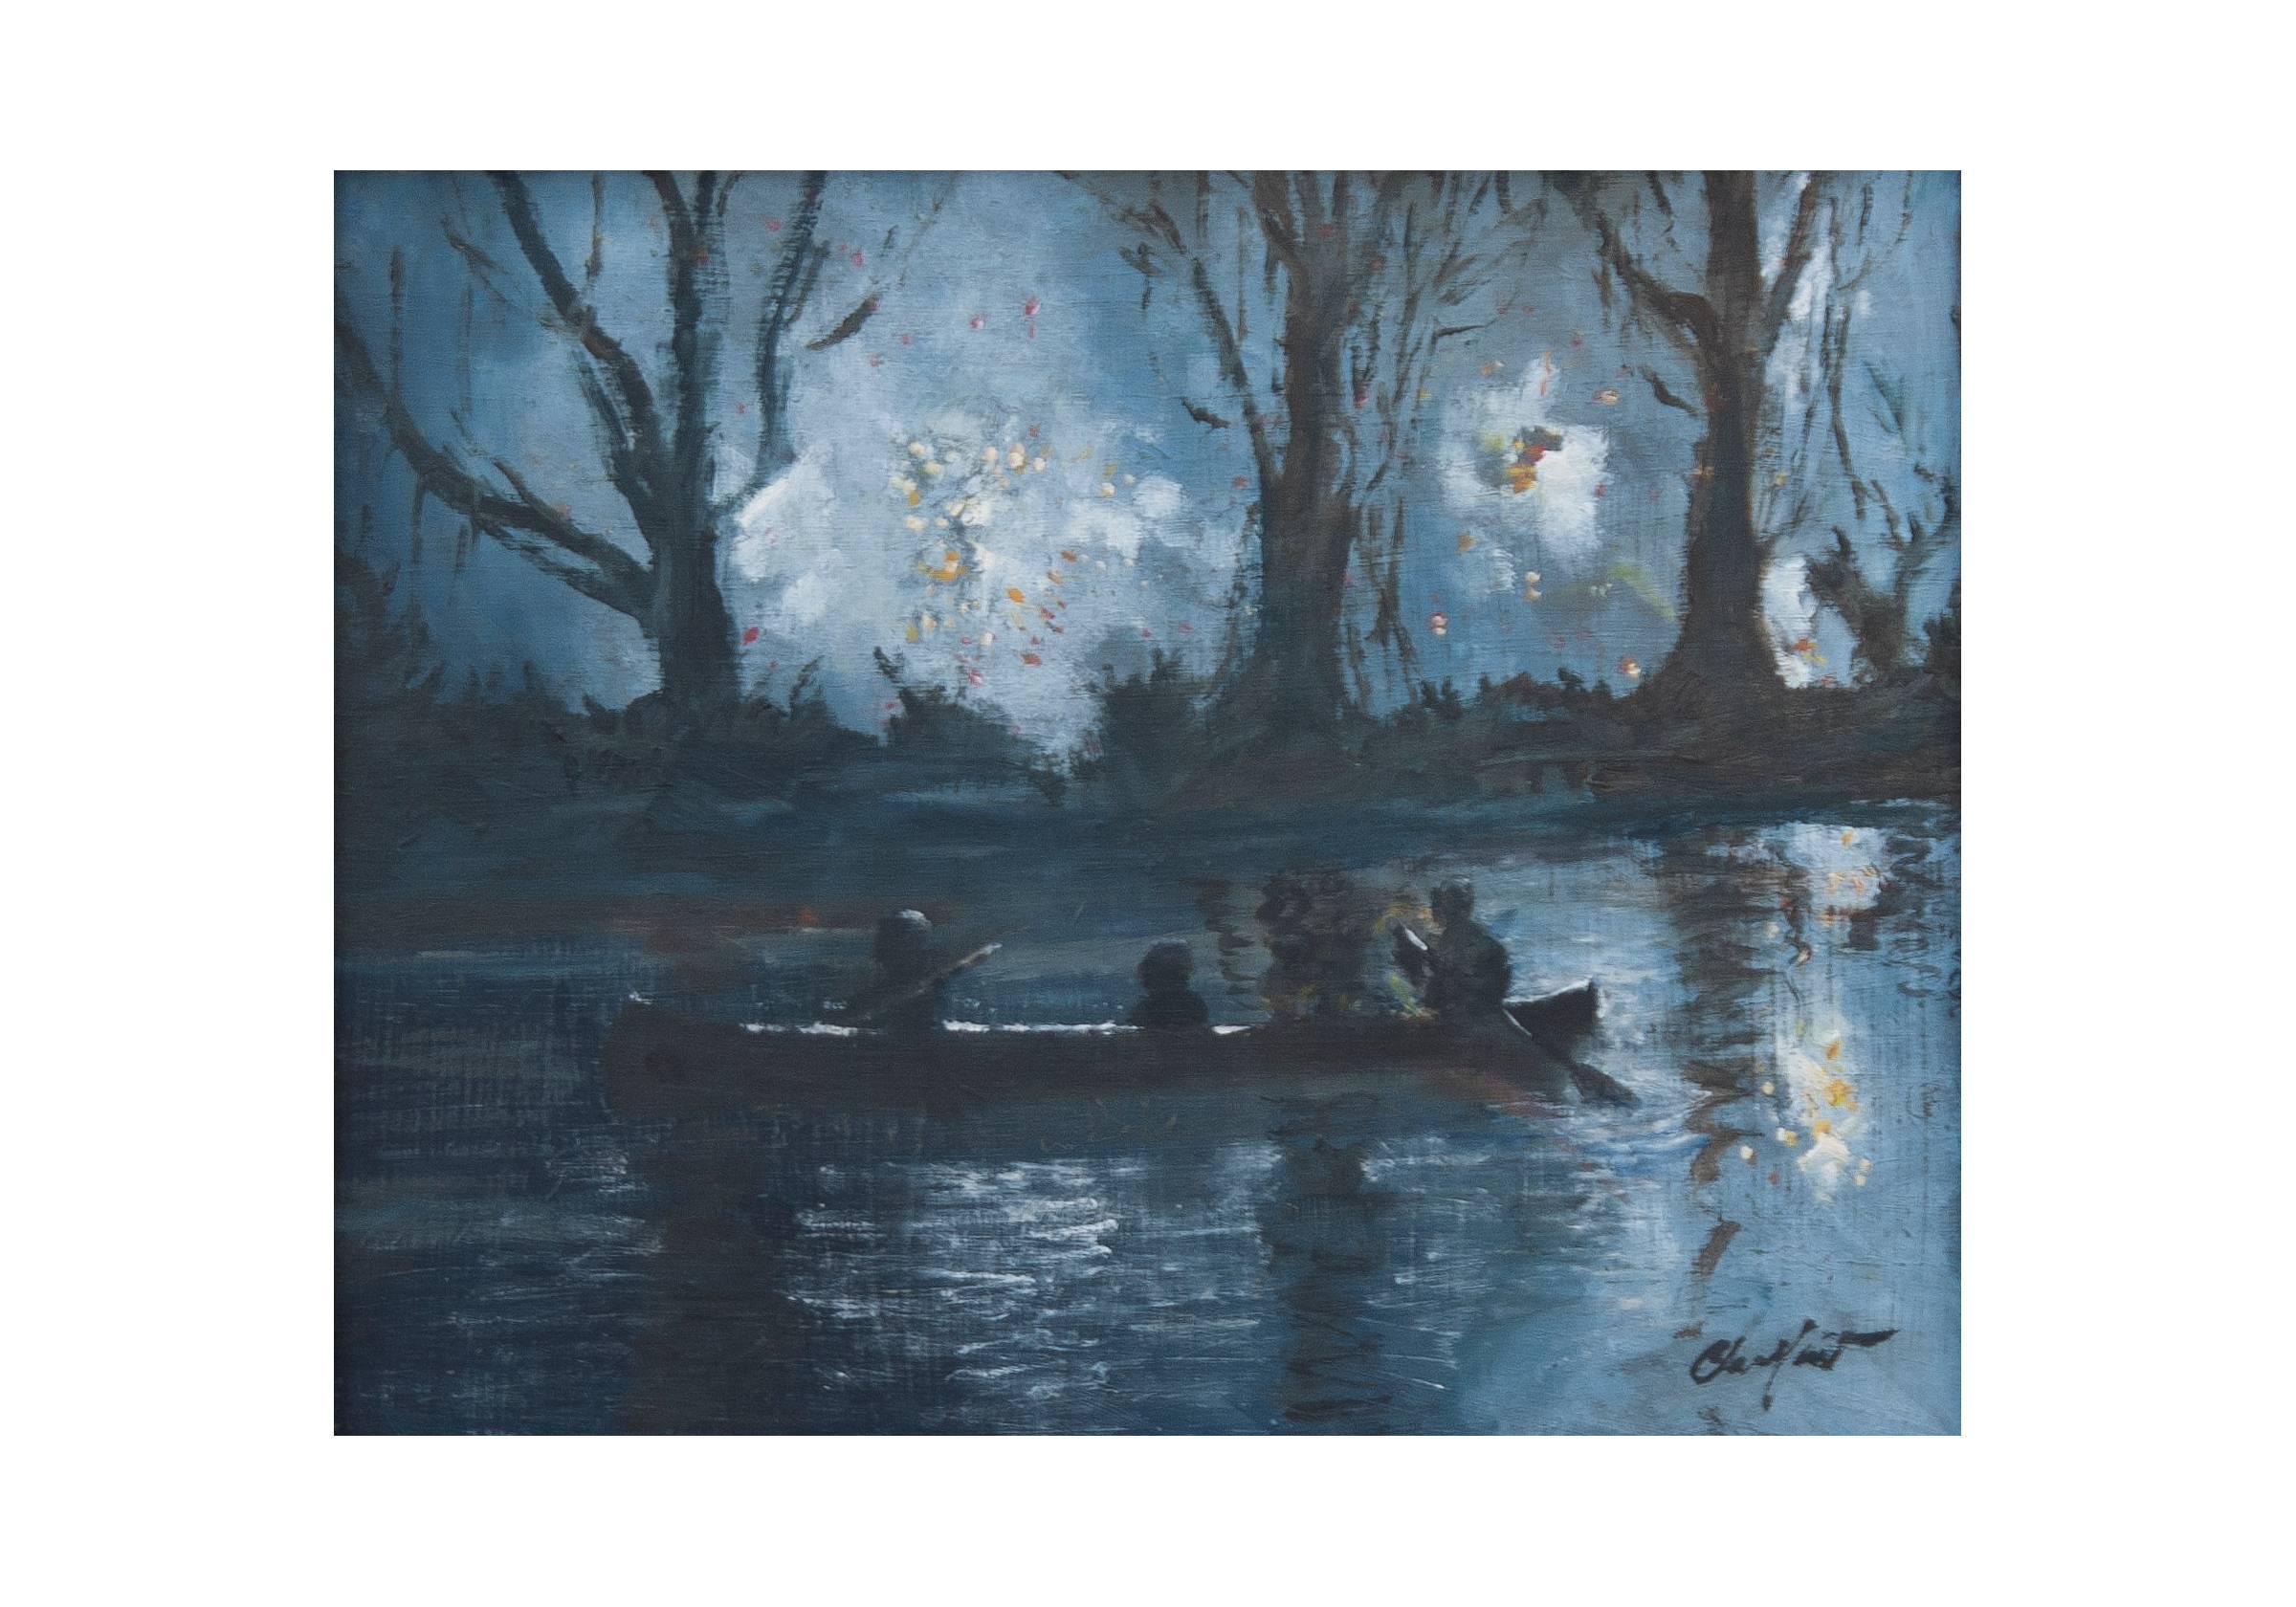 This nocturne illustrates a moment when a quiet boating party’s serenity is suddenly rocked. The once peaceful night sky explodes with fireworks and merrymaking. Someone is always quietly observing.